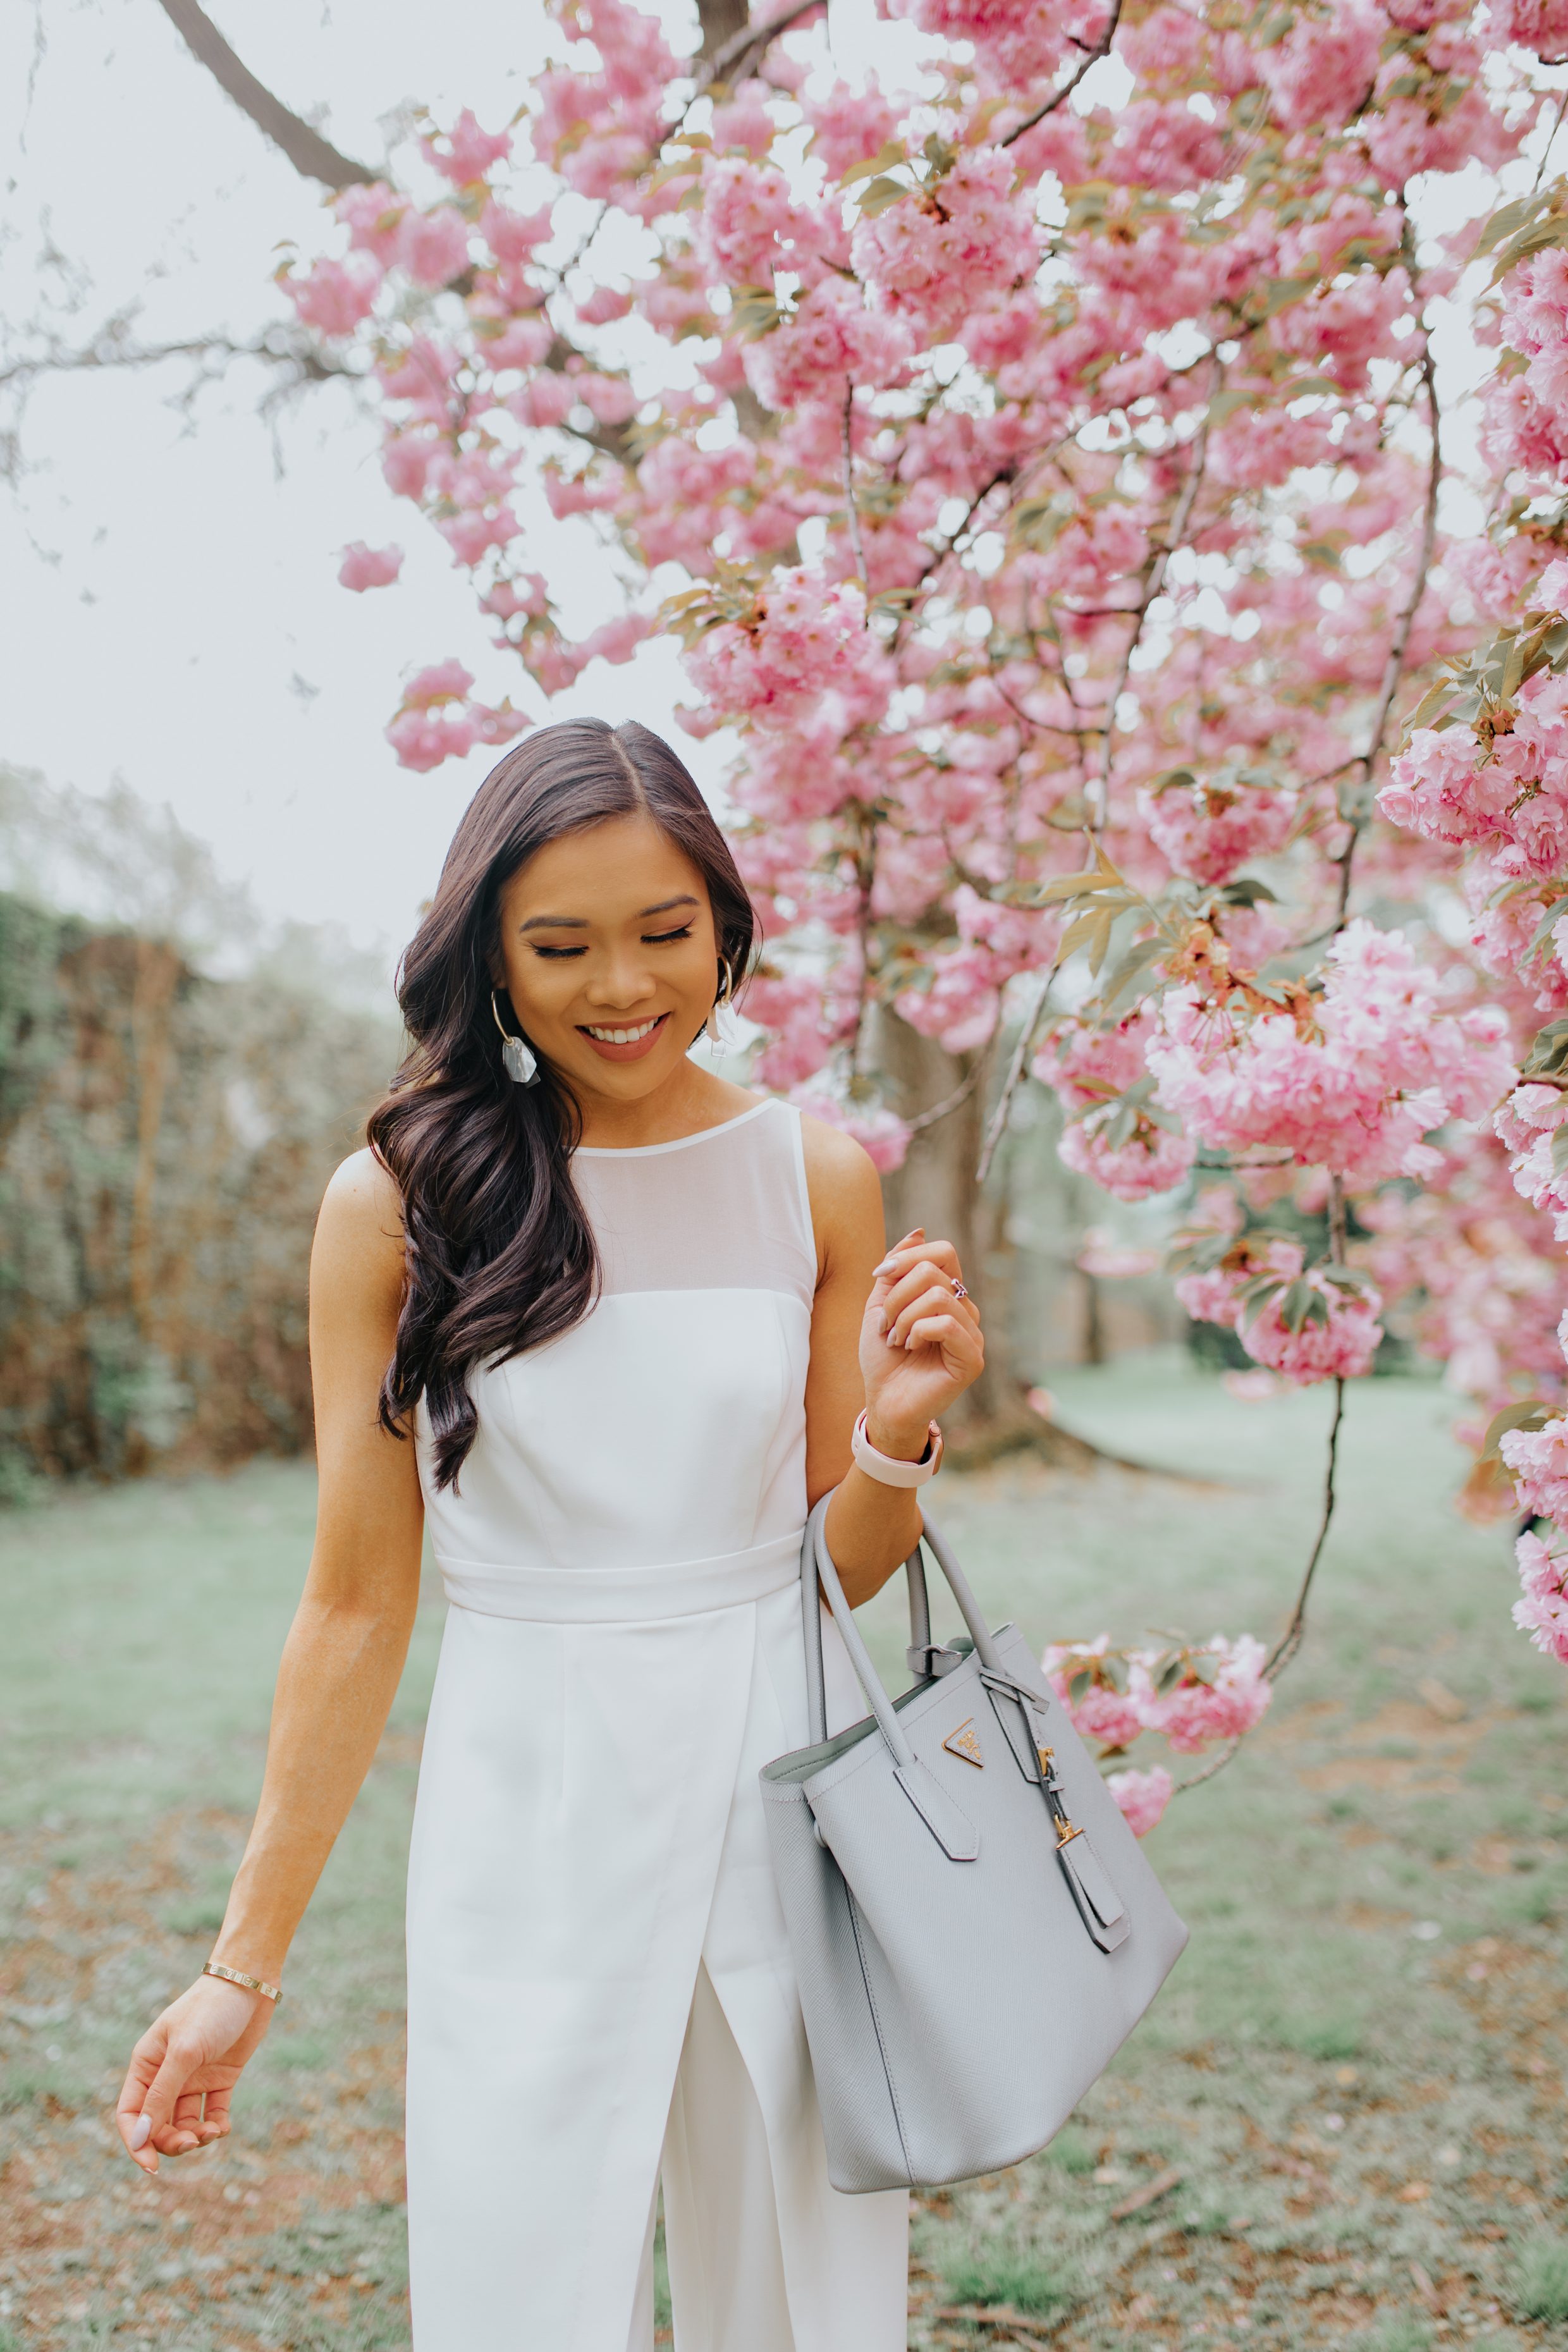 Brunette woman wears a white jumpsuit in front of cherry blossoms